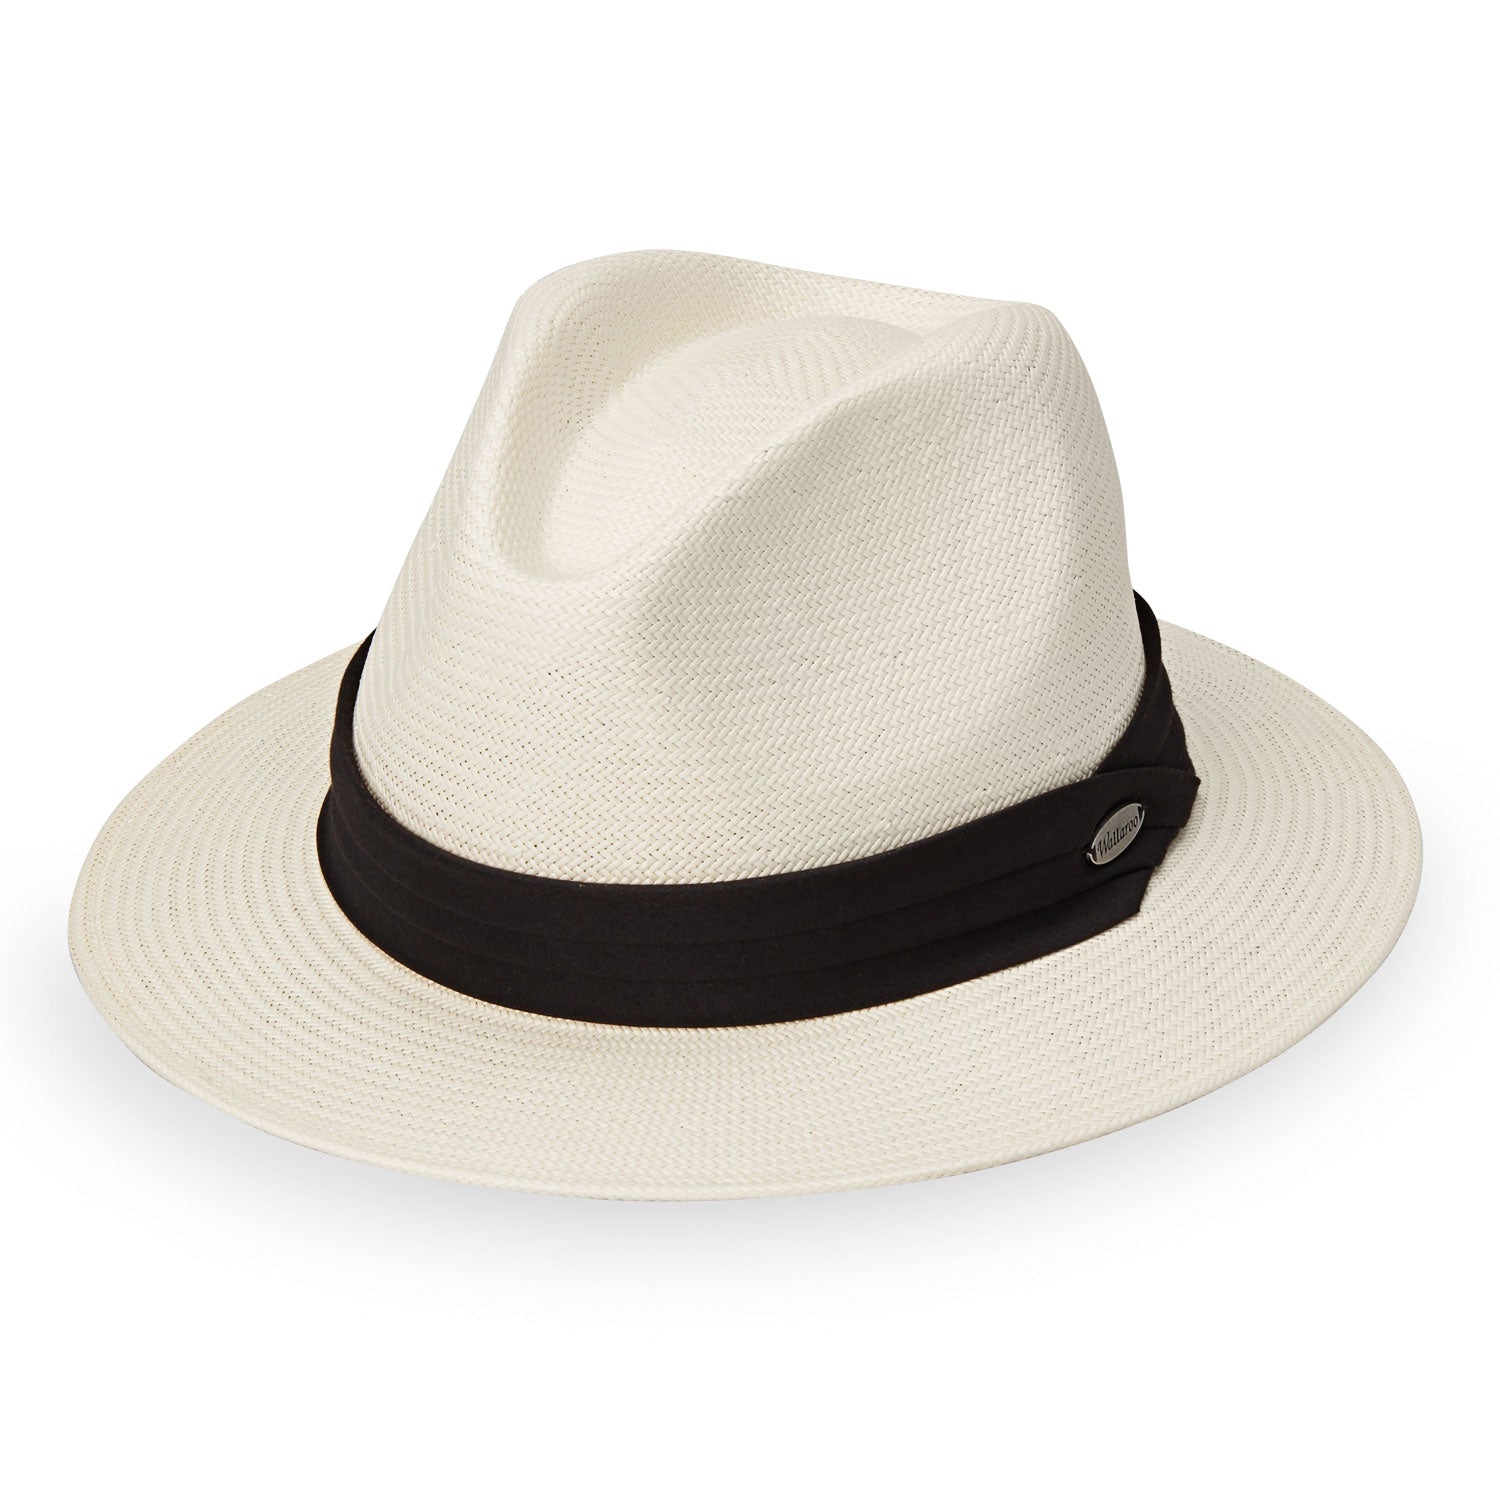 Featuring Women's Fedora Style Monterey UPF Straw Sun Hat in Natural with Solid Black Trim from Wallaroo